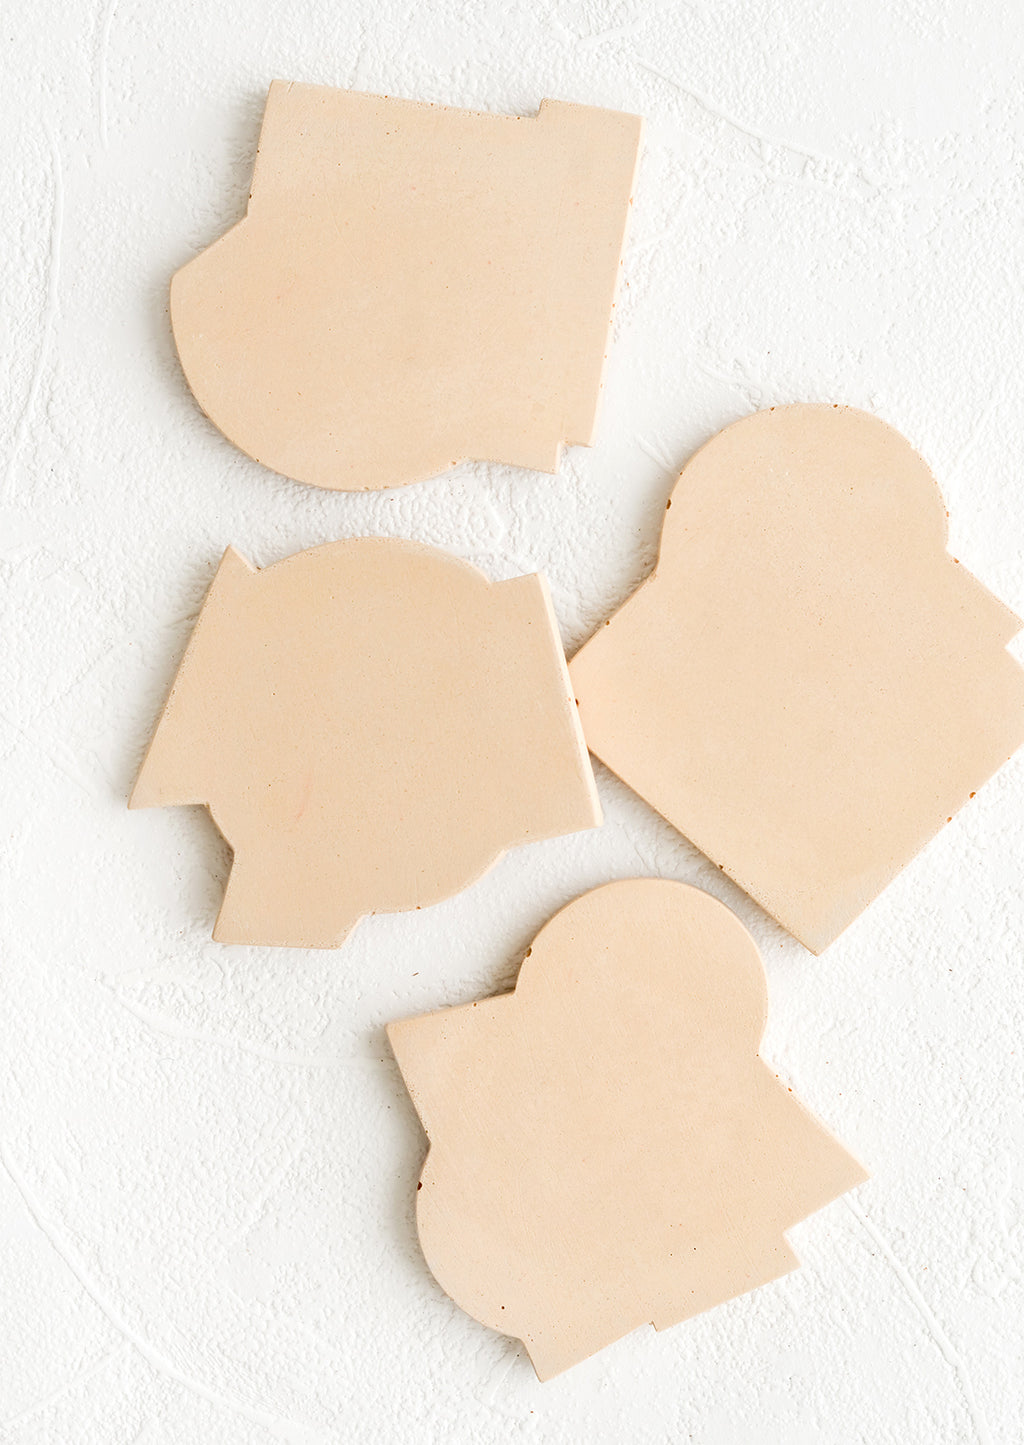 Straw: Four concrete coasters in nude color with unique abstract shapes.